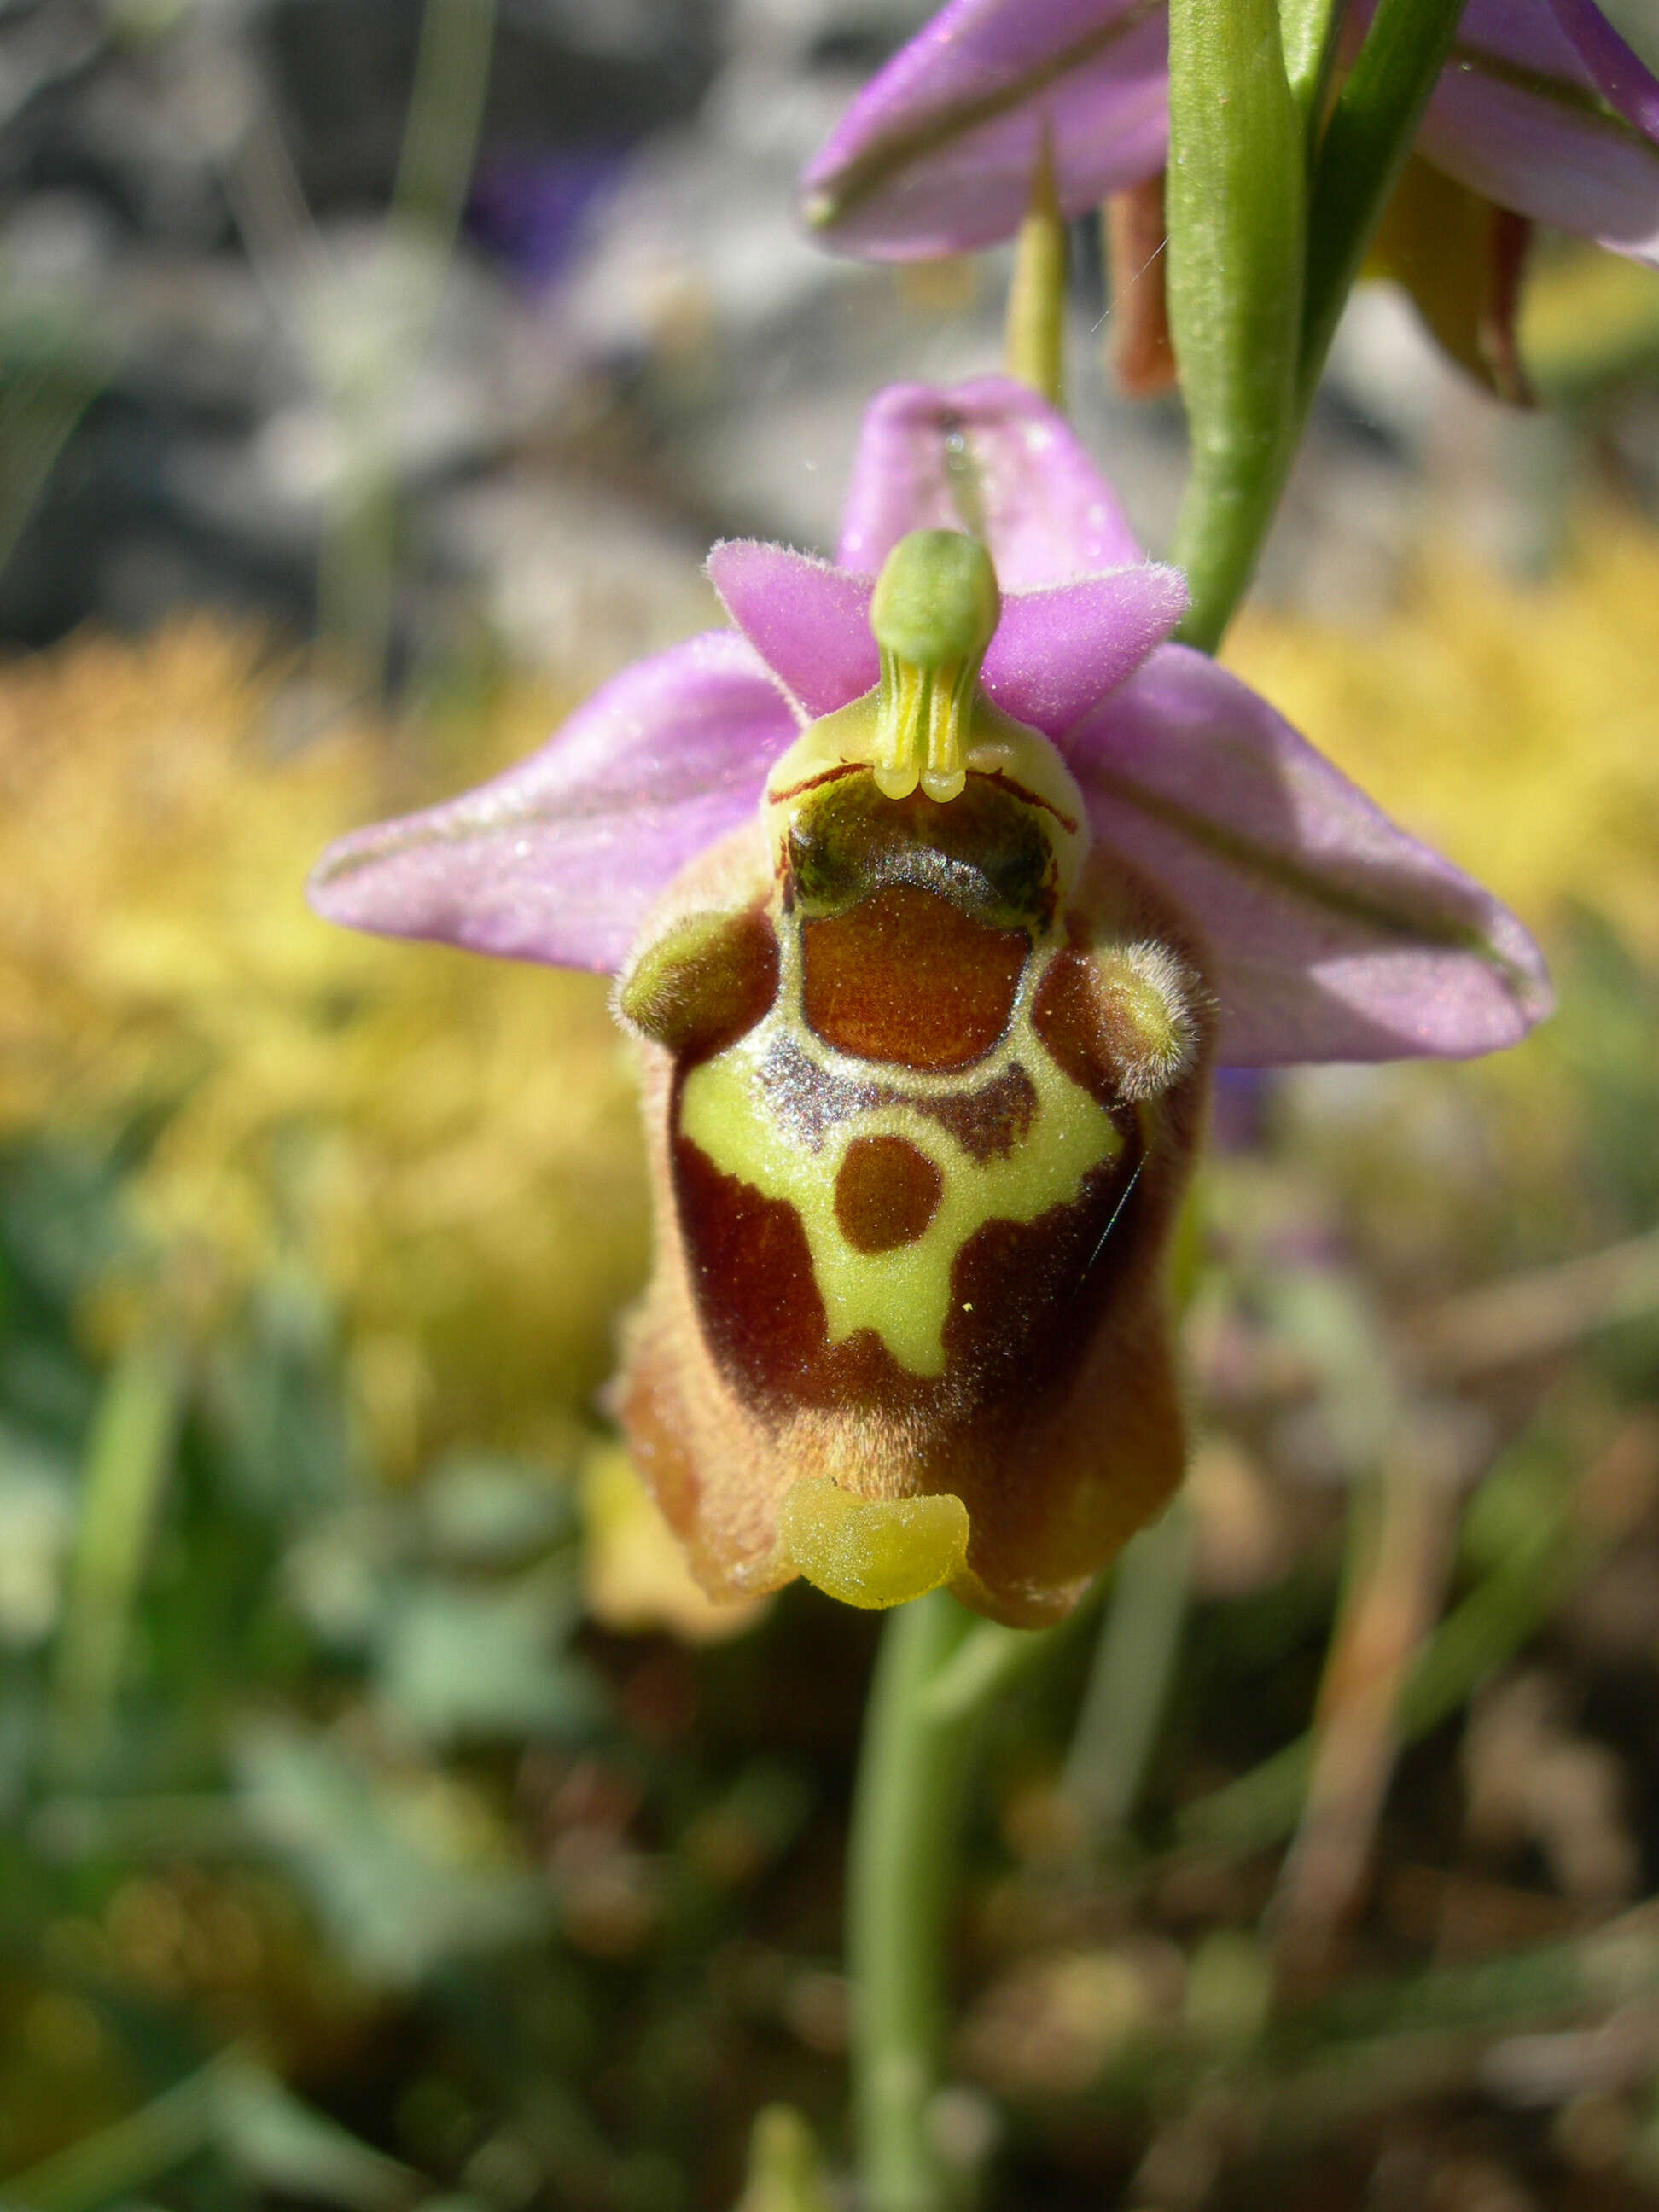 Image of late spider-orchid